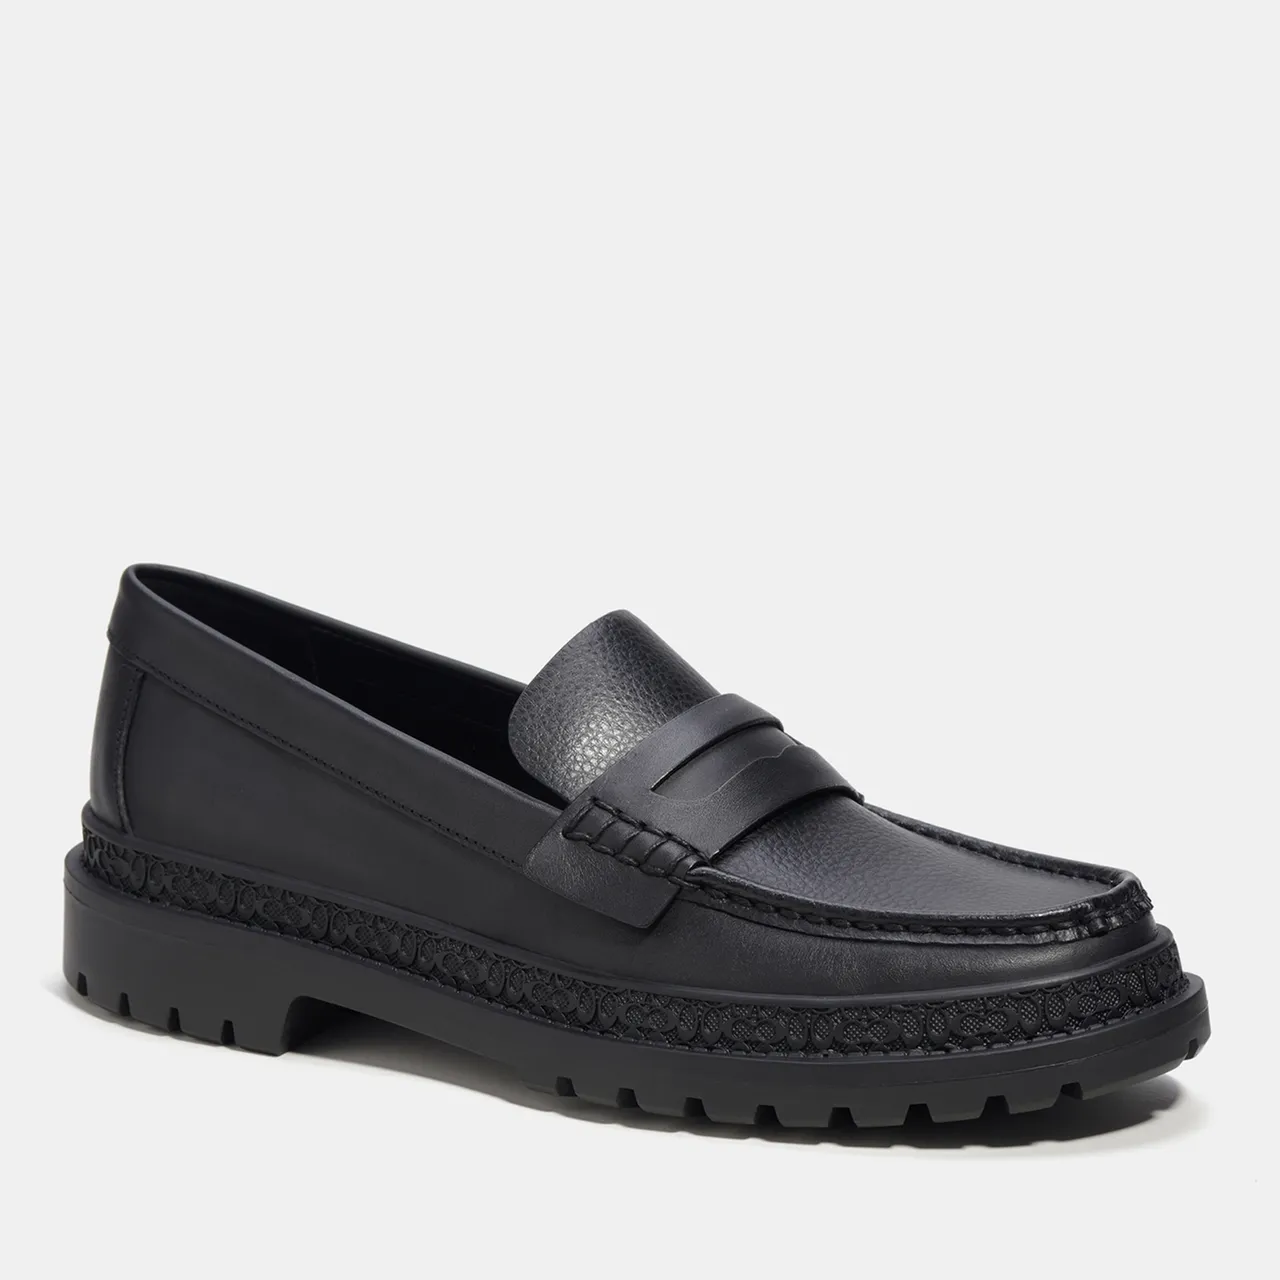 Coach Men's Cooper Leather Penny Loafers